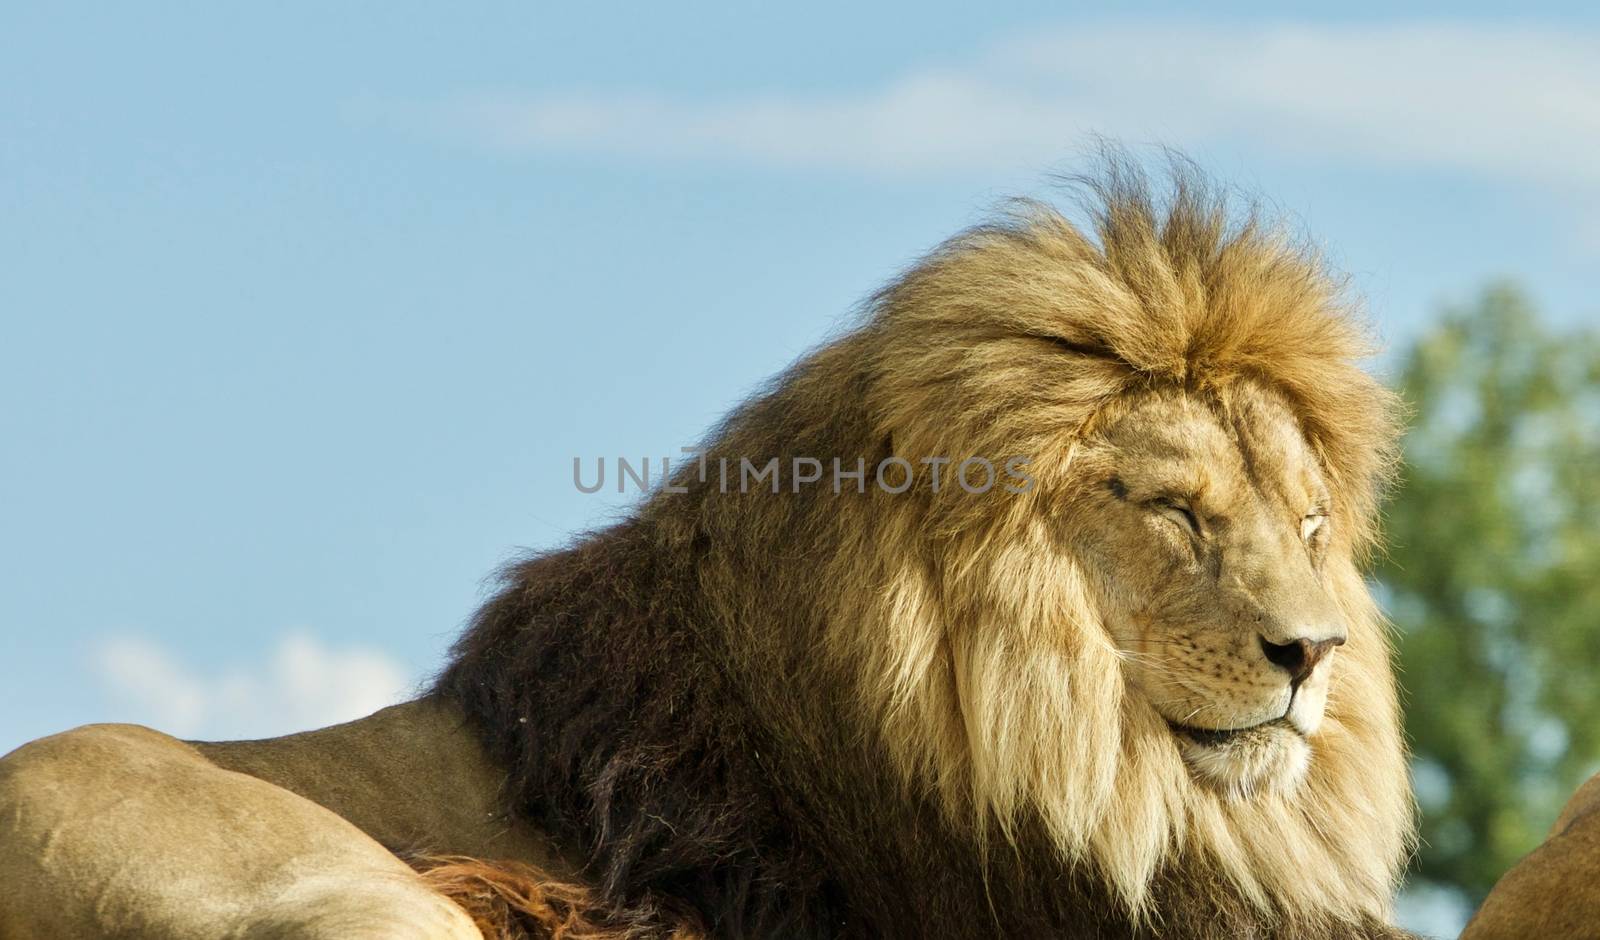 Isolated image of two lions laying together